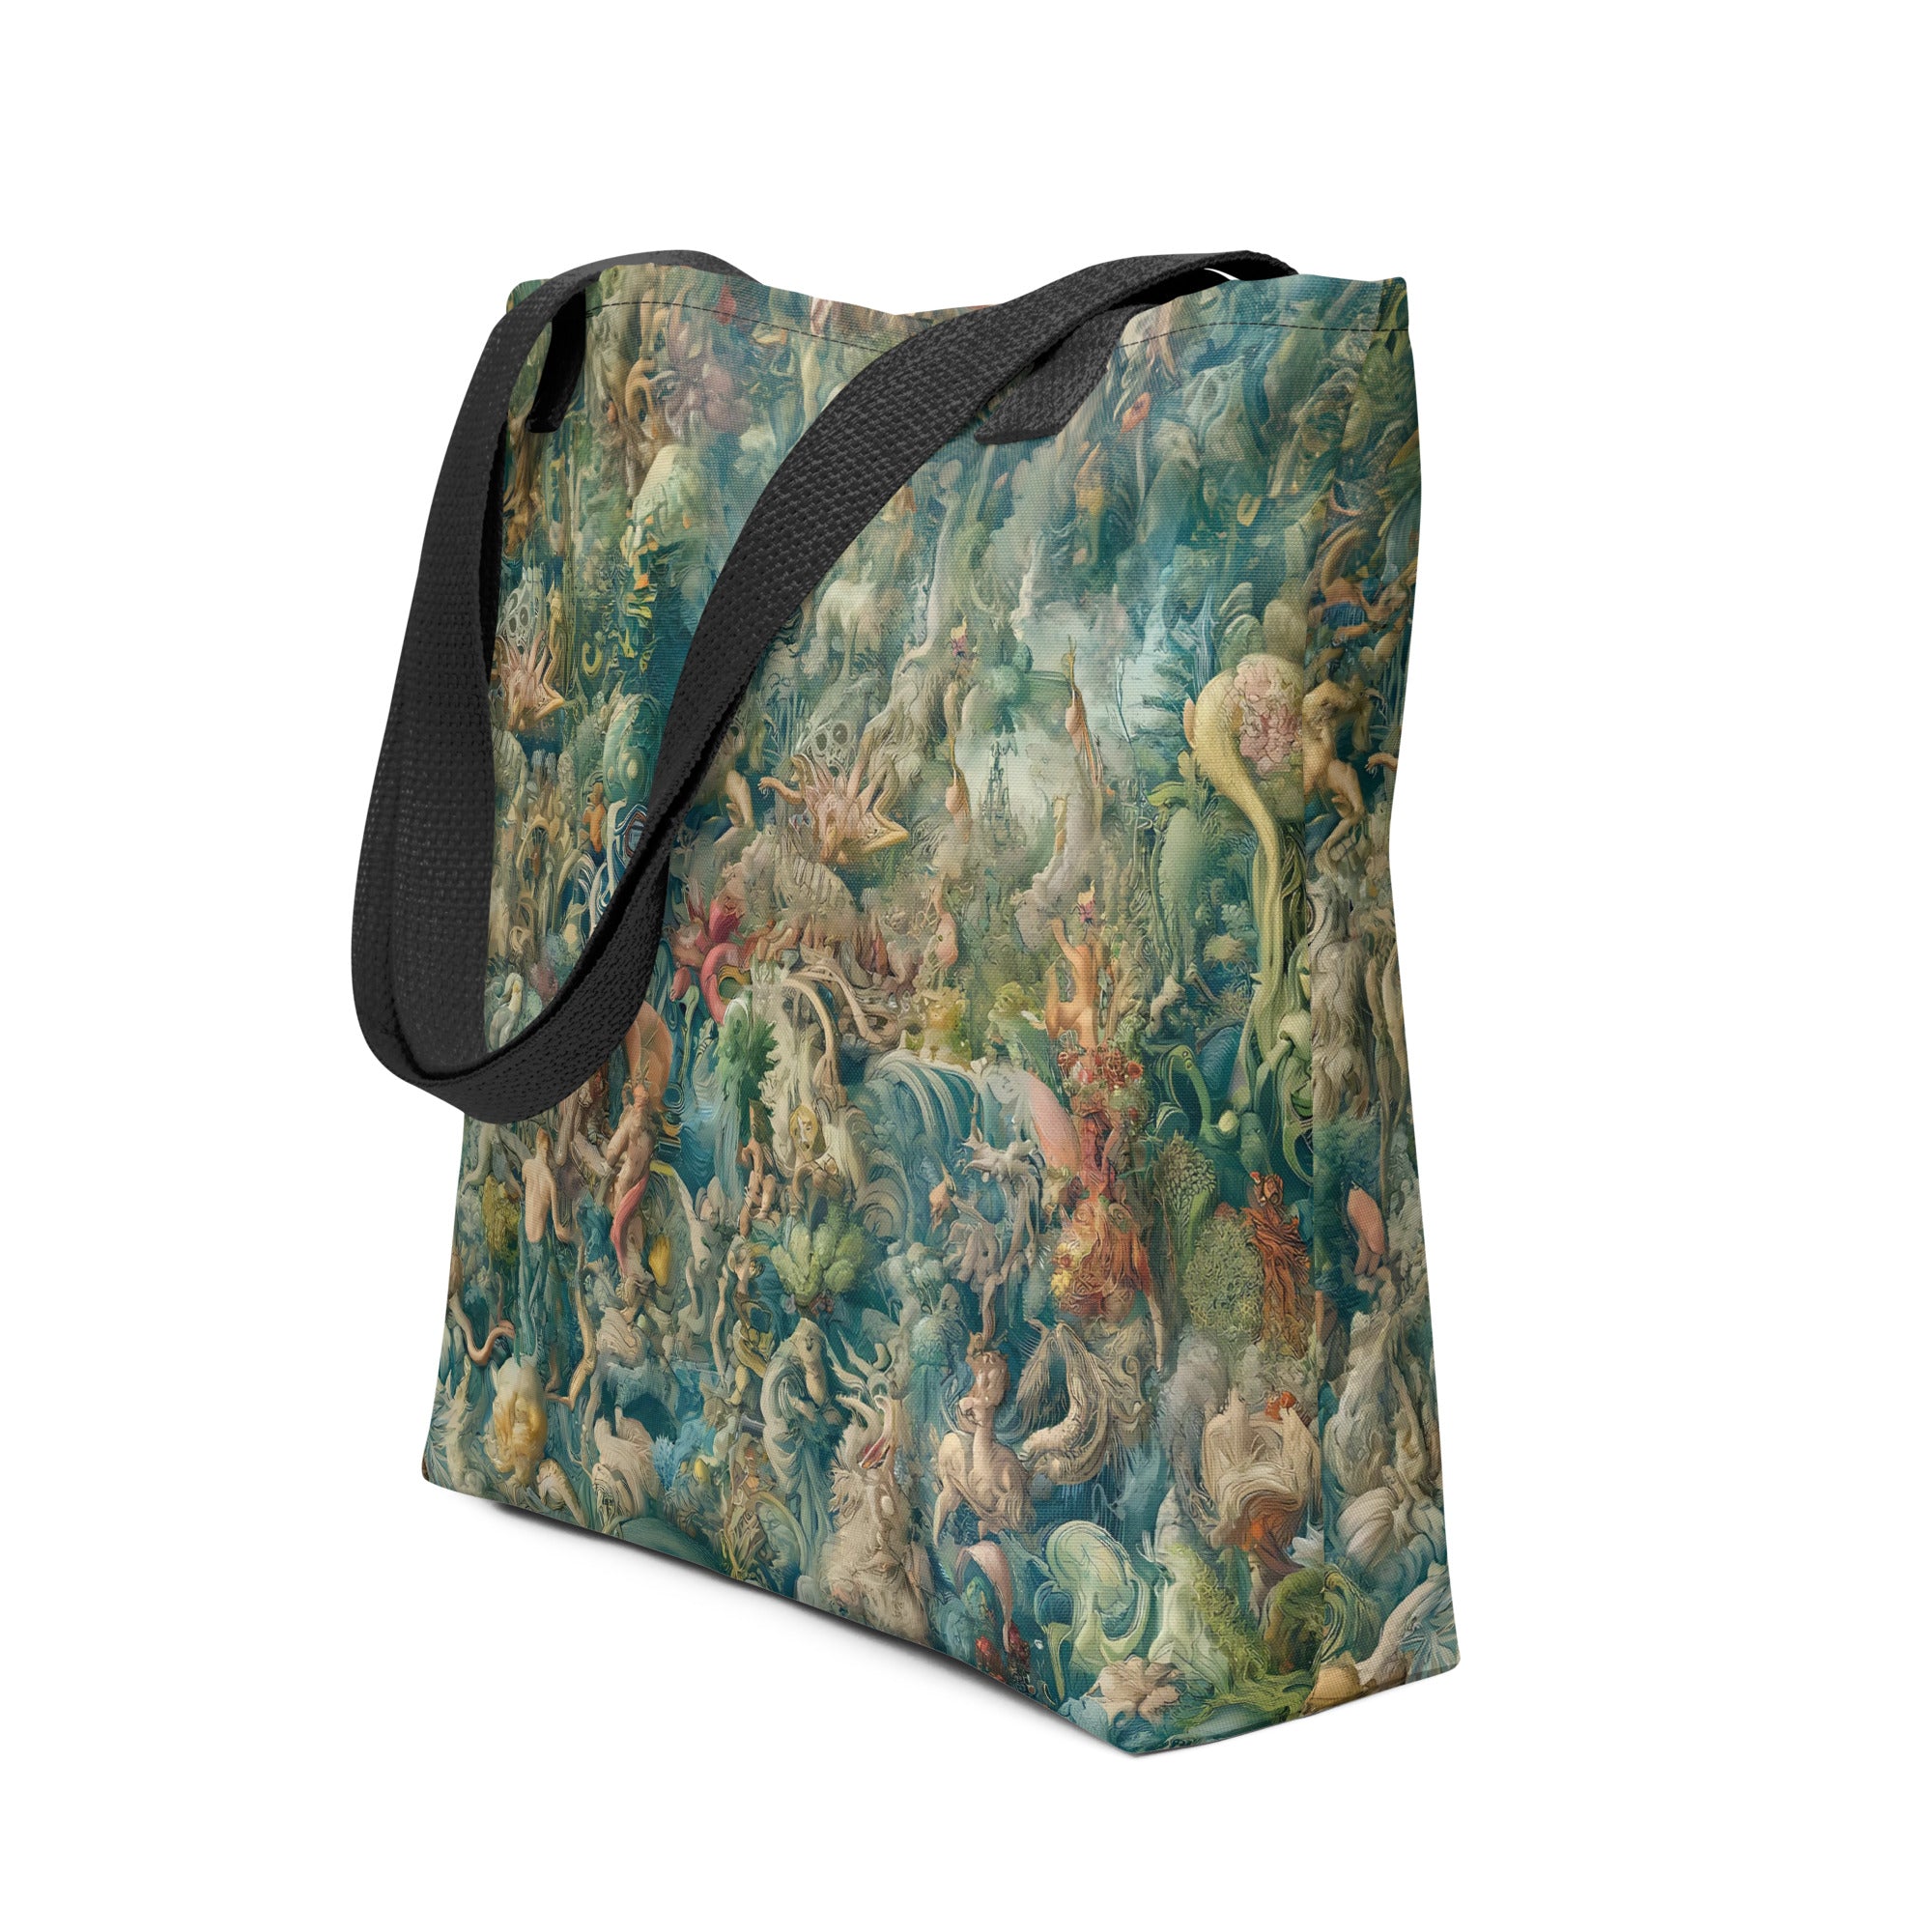 Hieronymus Bosch 'The Garden of Earthly Delights' Famous Painting Totebag | Allover Print Art Tote Bag